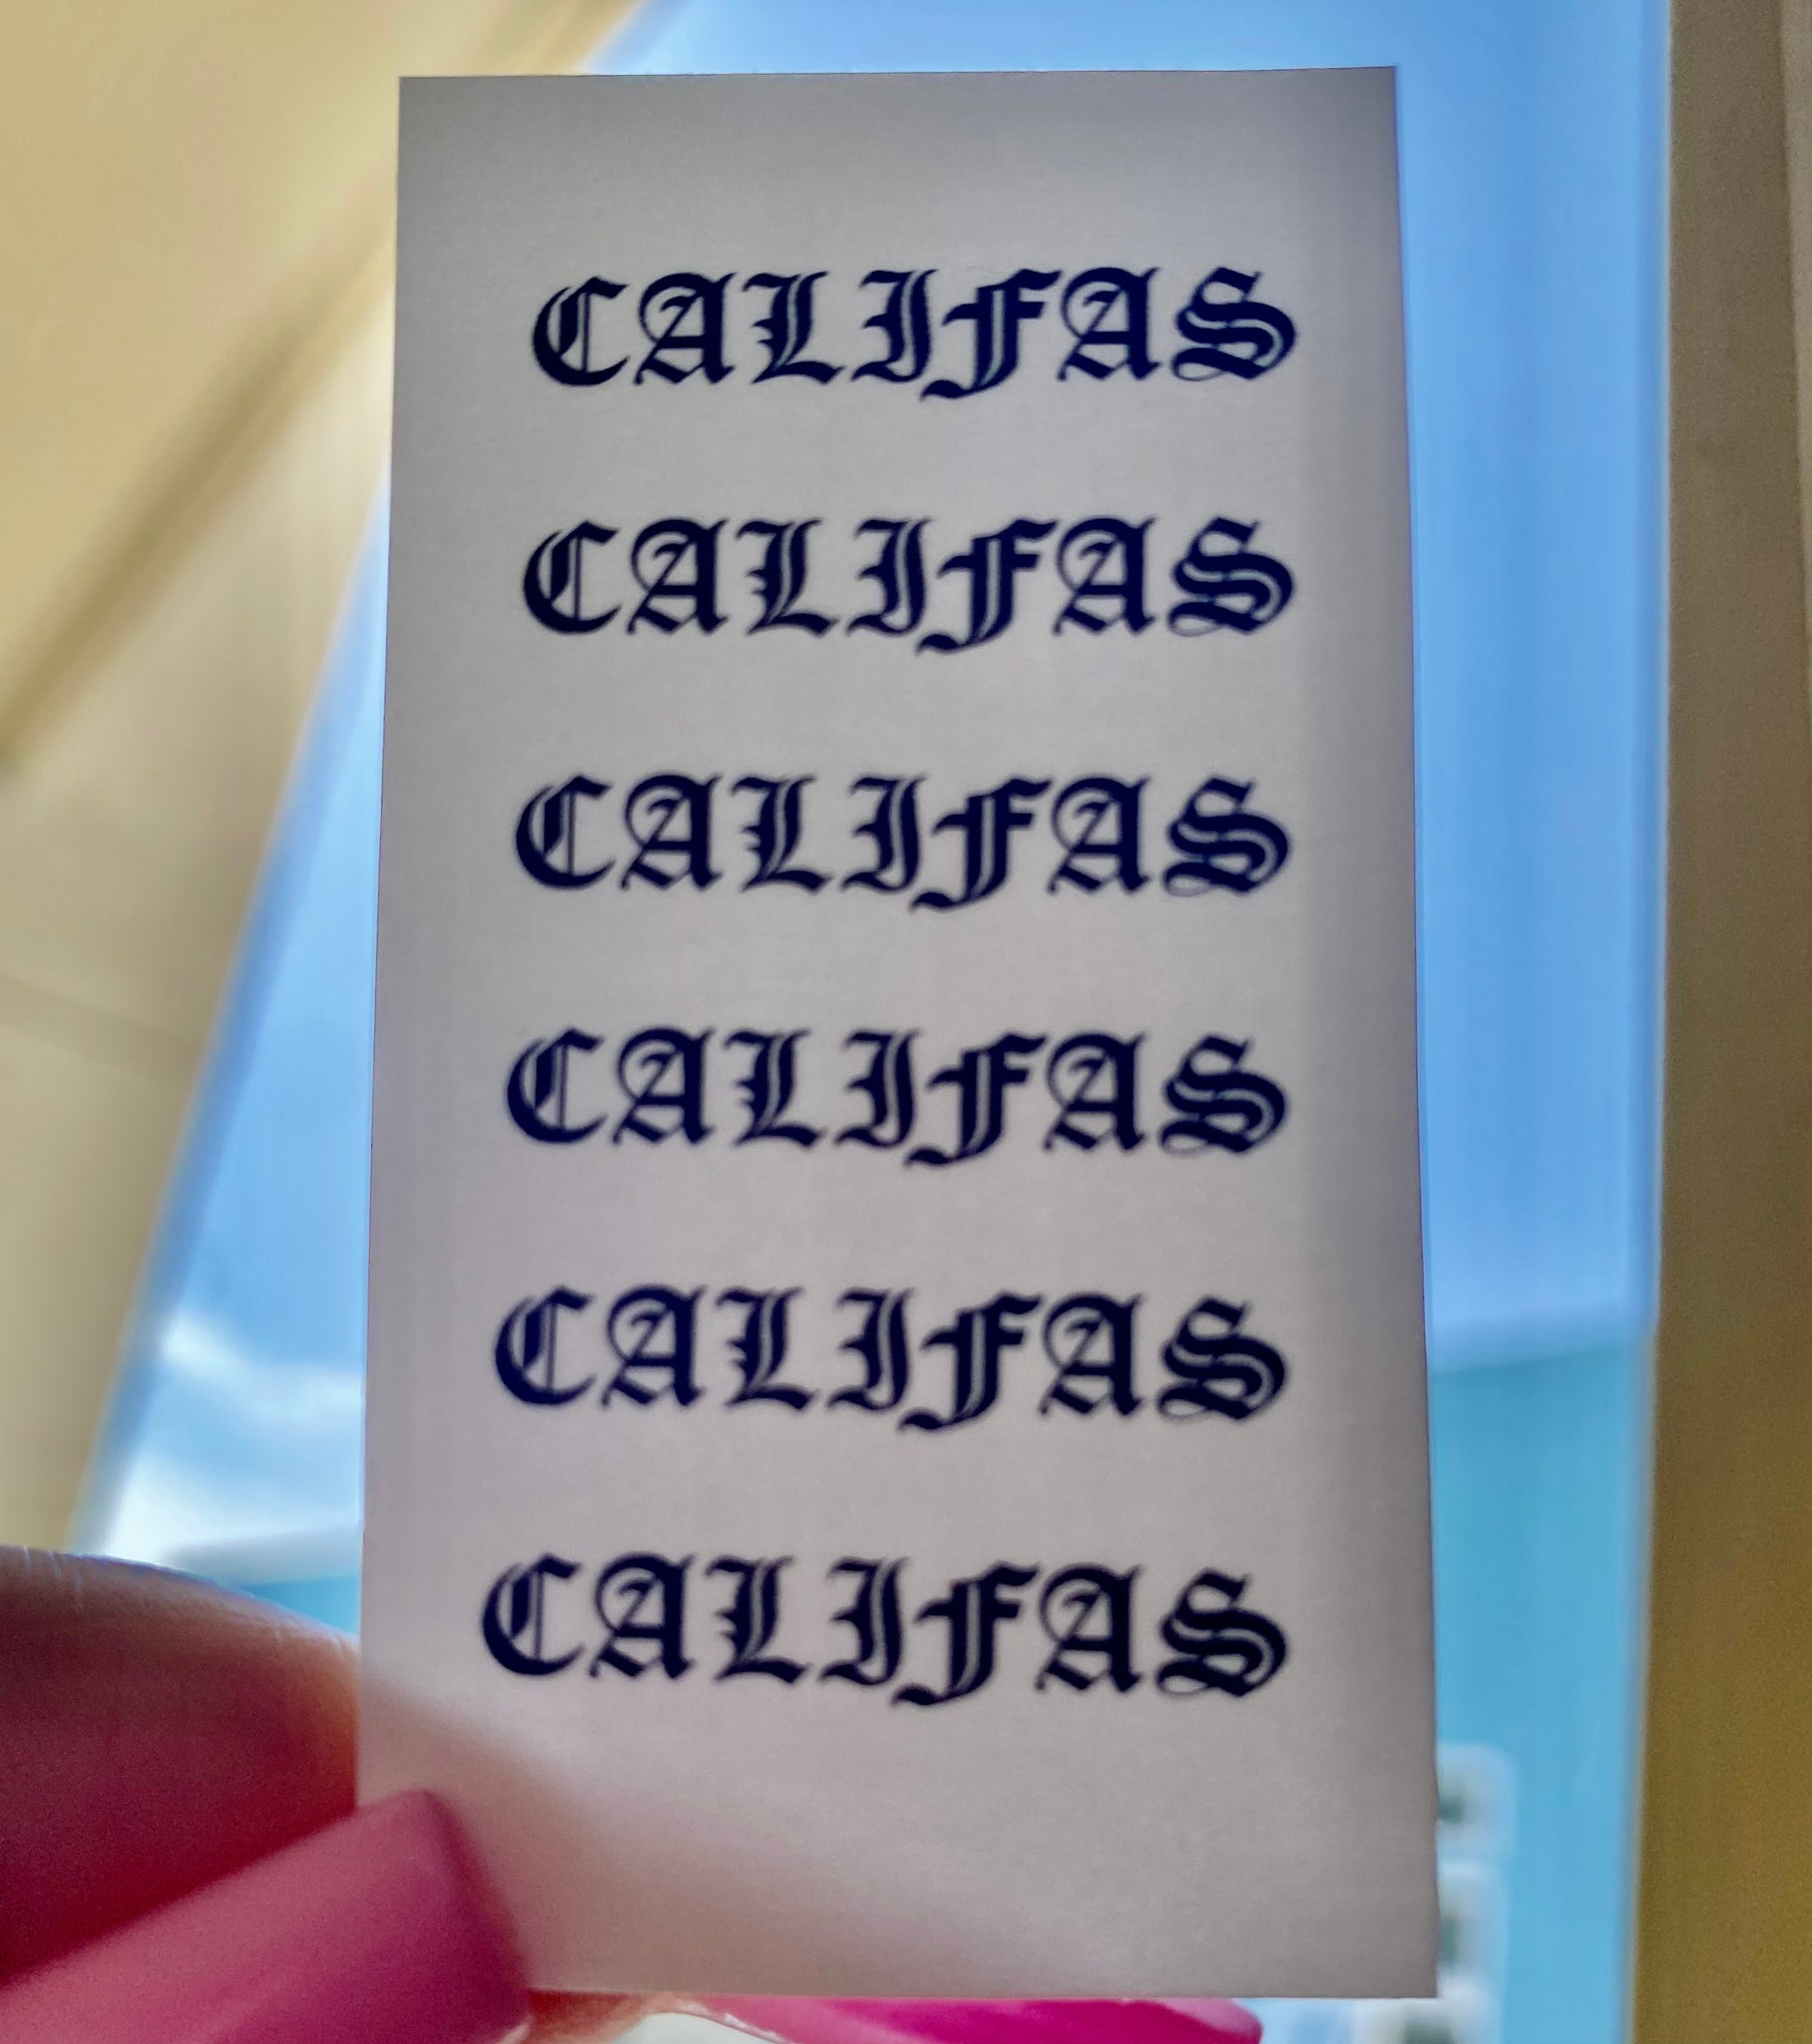 Califas